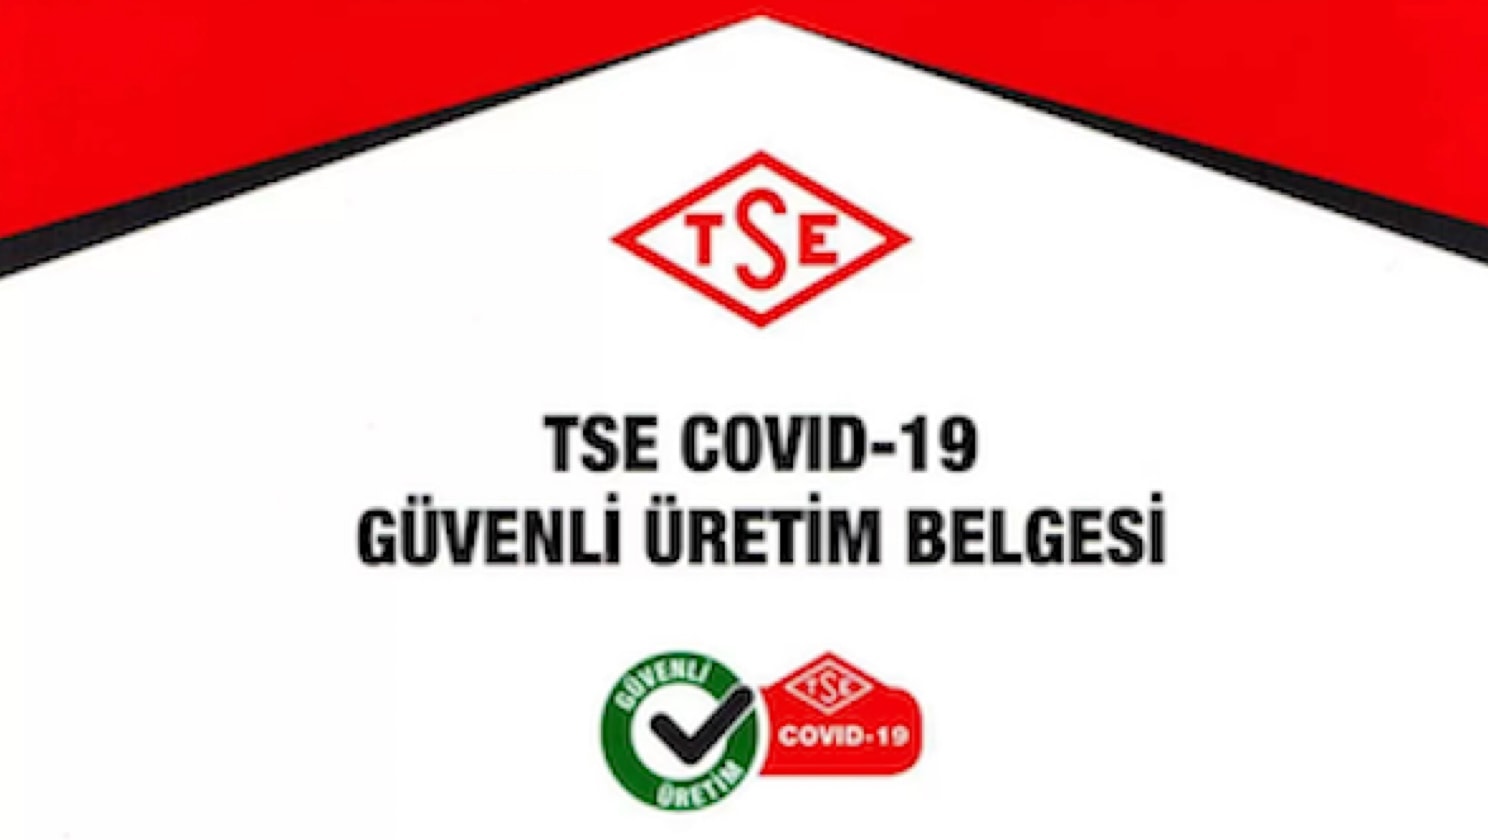 We are Entitled to Receive TSE COVID-19 Safe Production Certificate